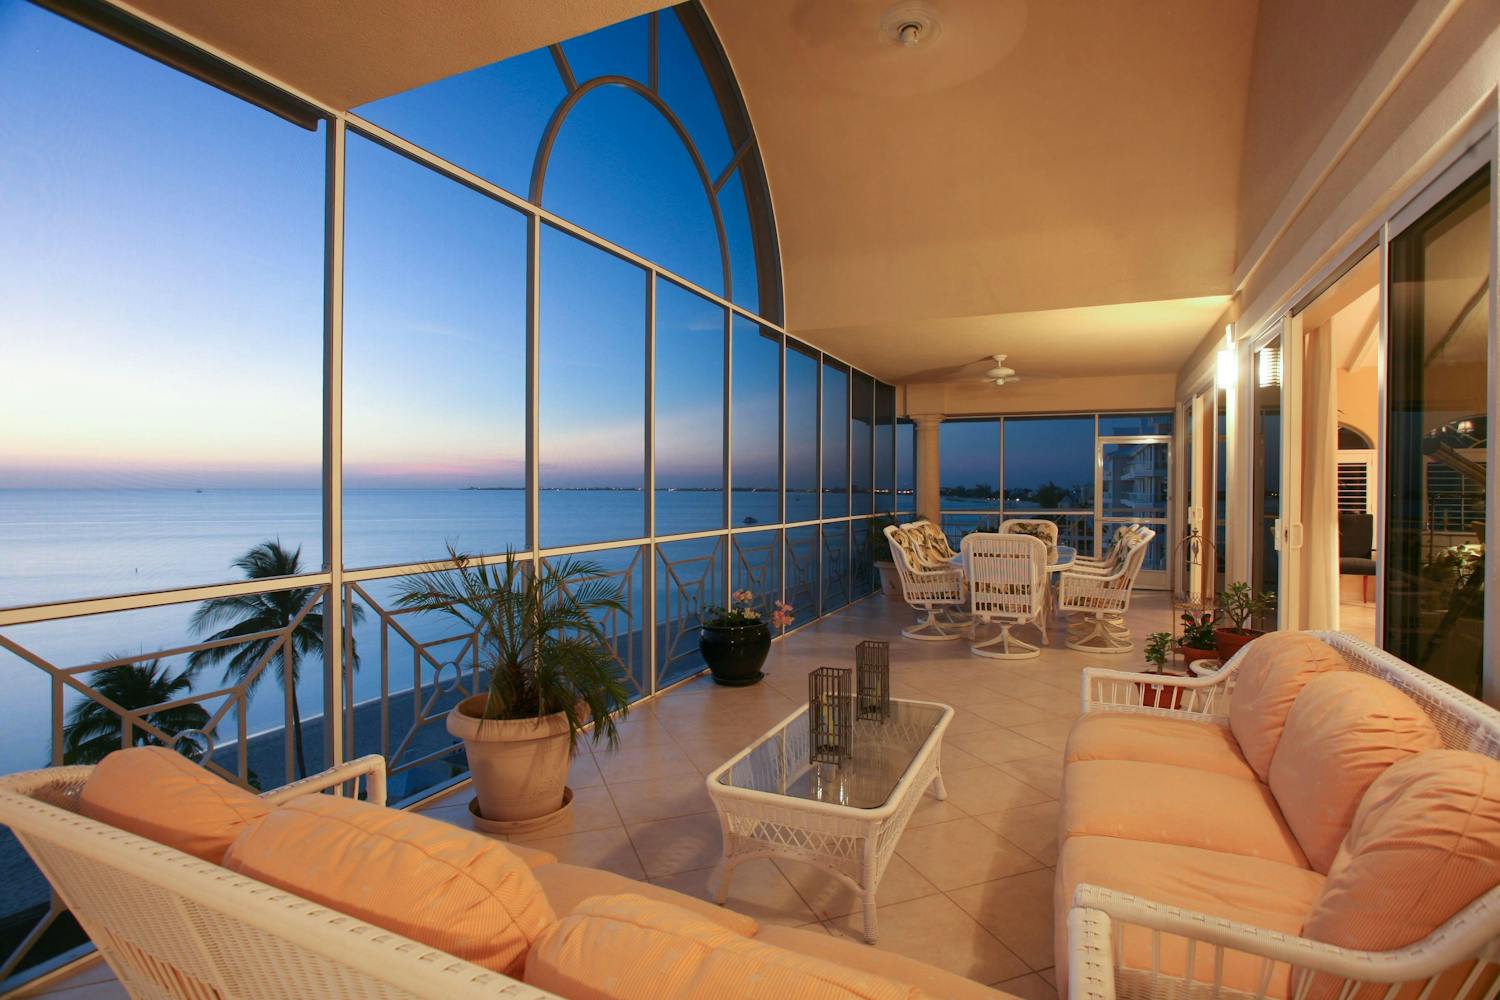 Enclosed patio overlooking the ocean at sunset